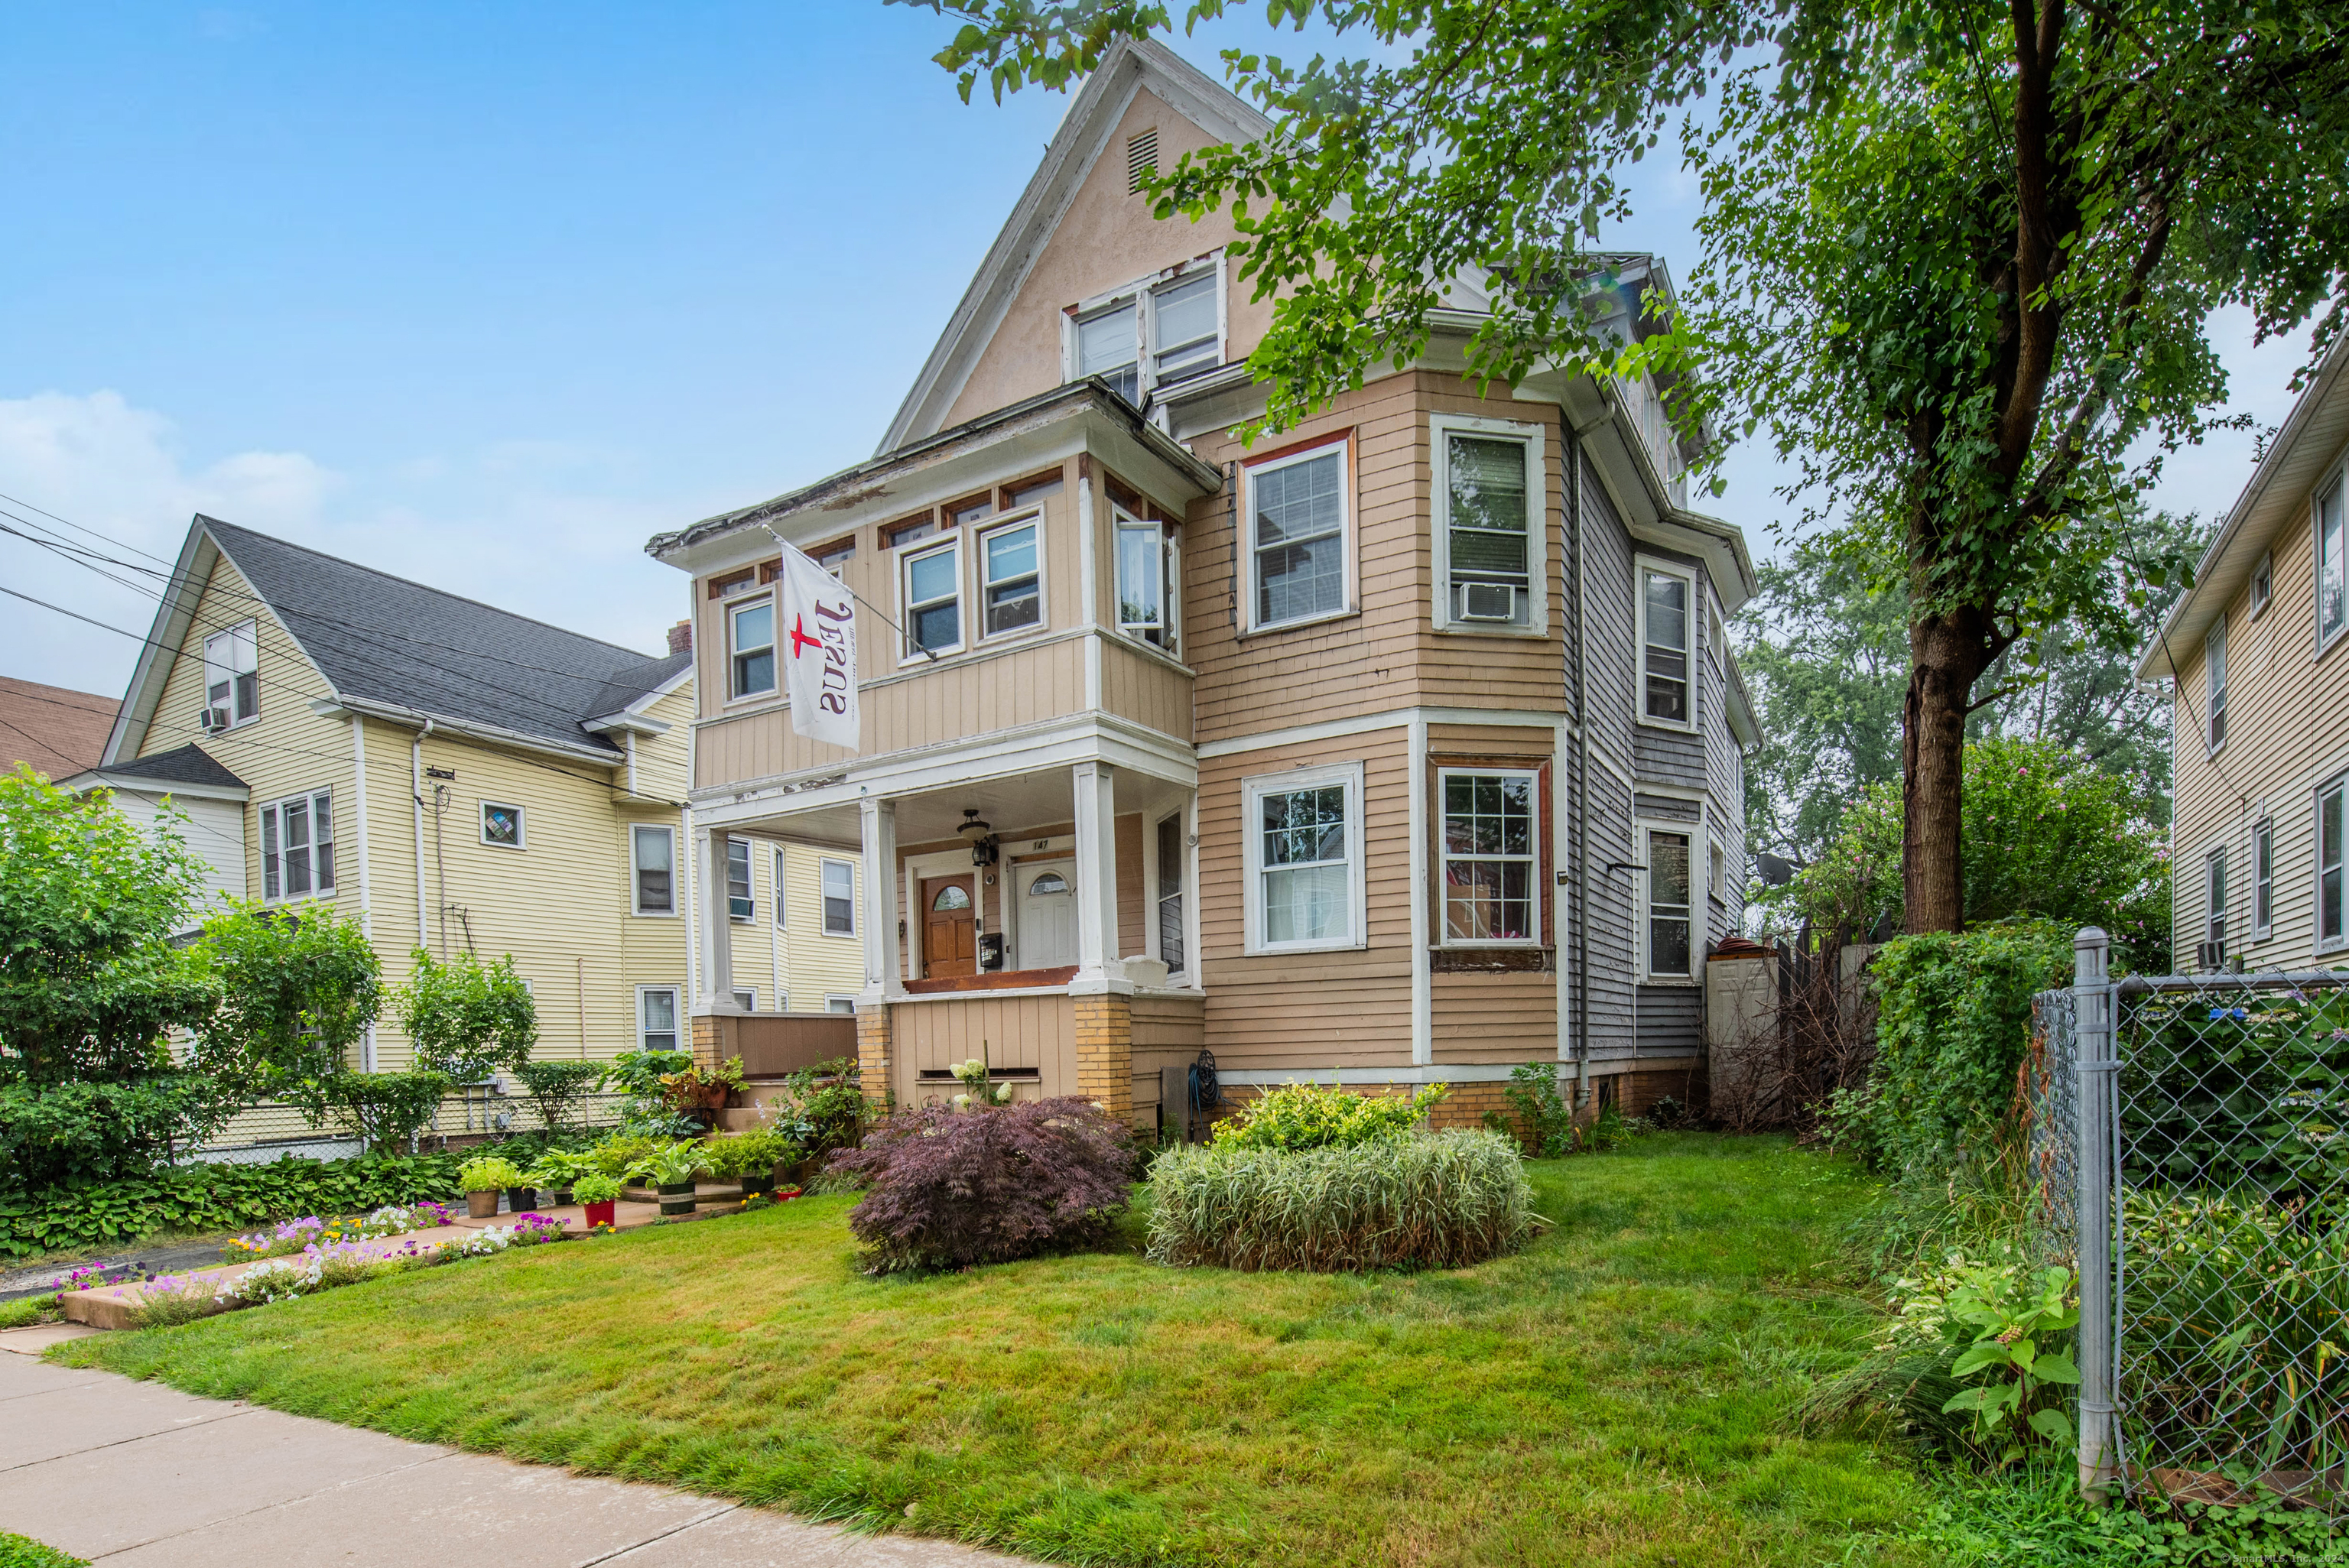 Property for Sale at 145 Bond Street, Hartford, Connecticut - Bedrooms: 7 
Bathrooms: 3 
Rooms: 3  - $270,000